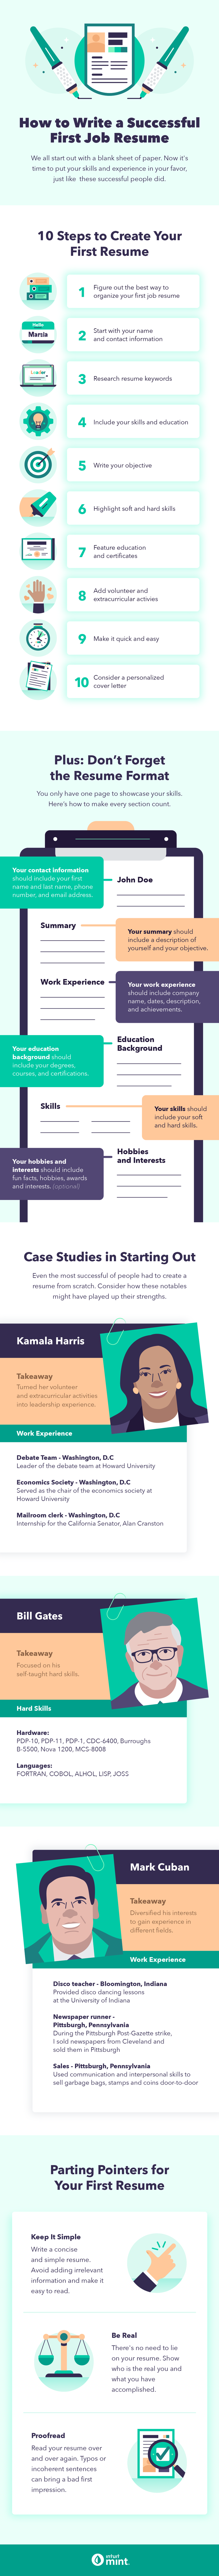 An infographic describes how to create a first resume and includes tips from the resumes of successful people. 